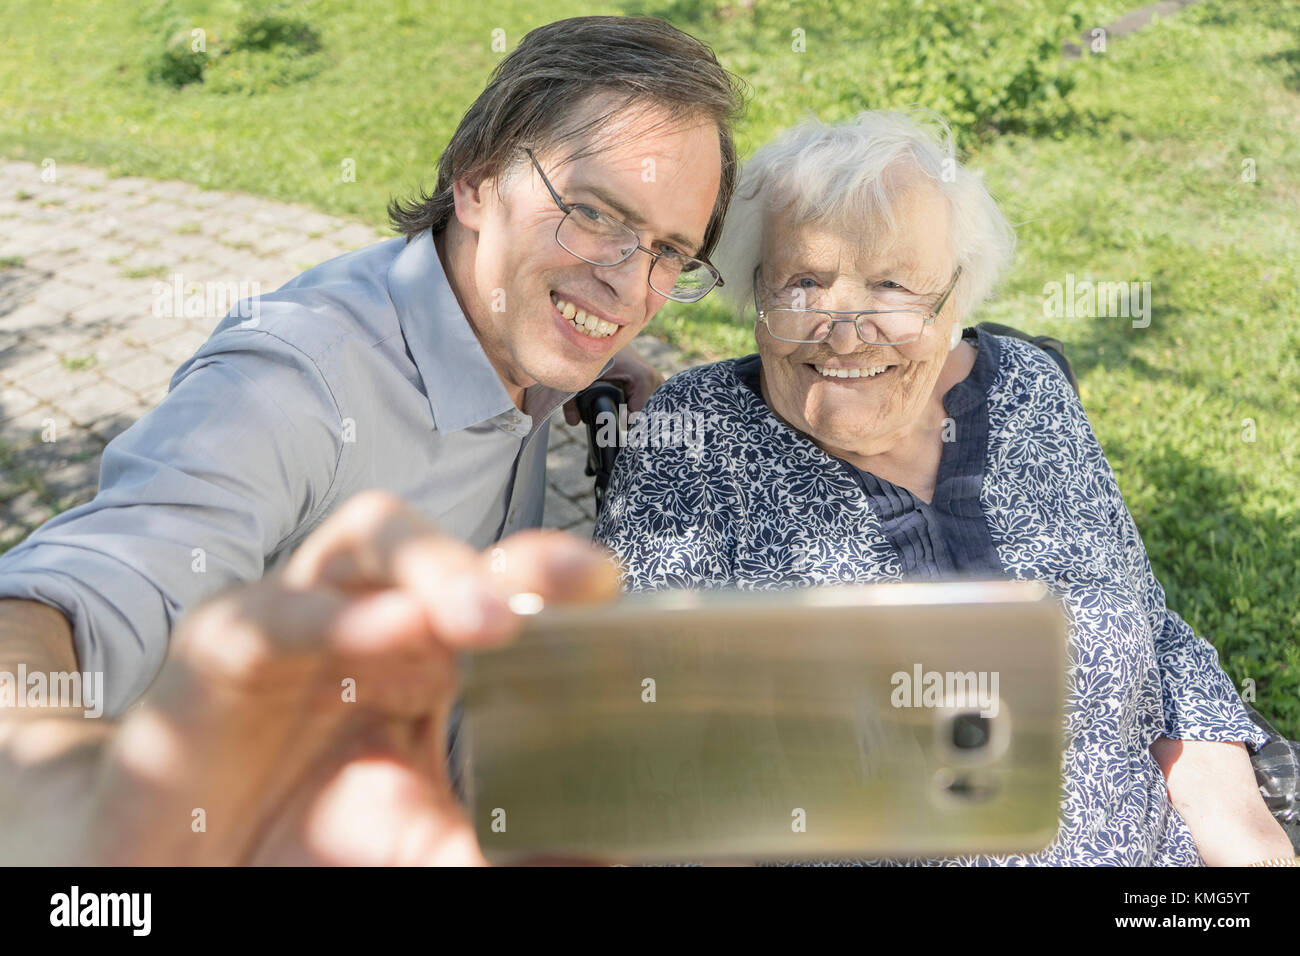 Son taking selfie with disabled mother on wheelchair Stock Photo